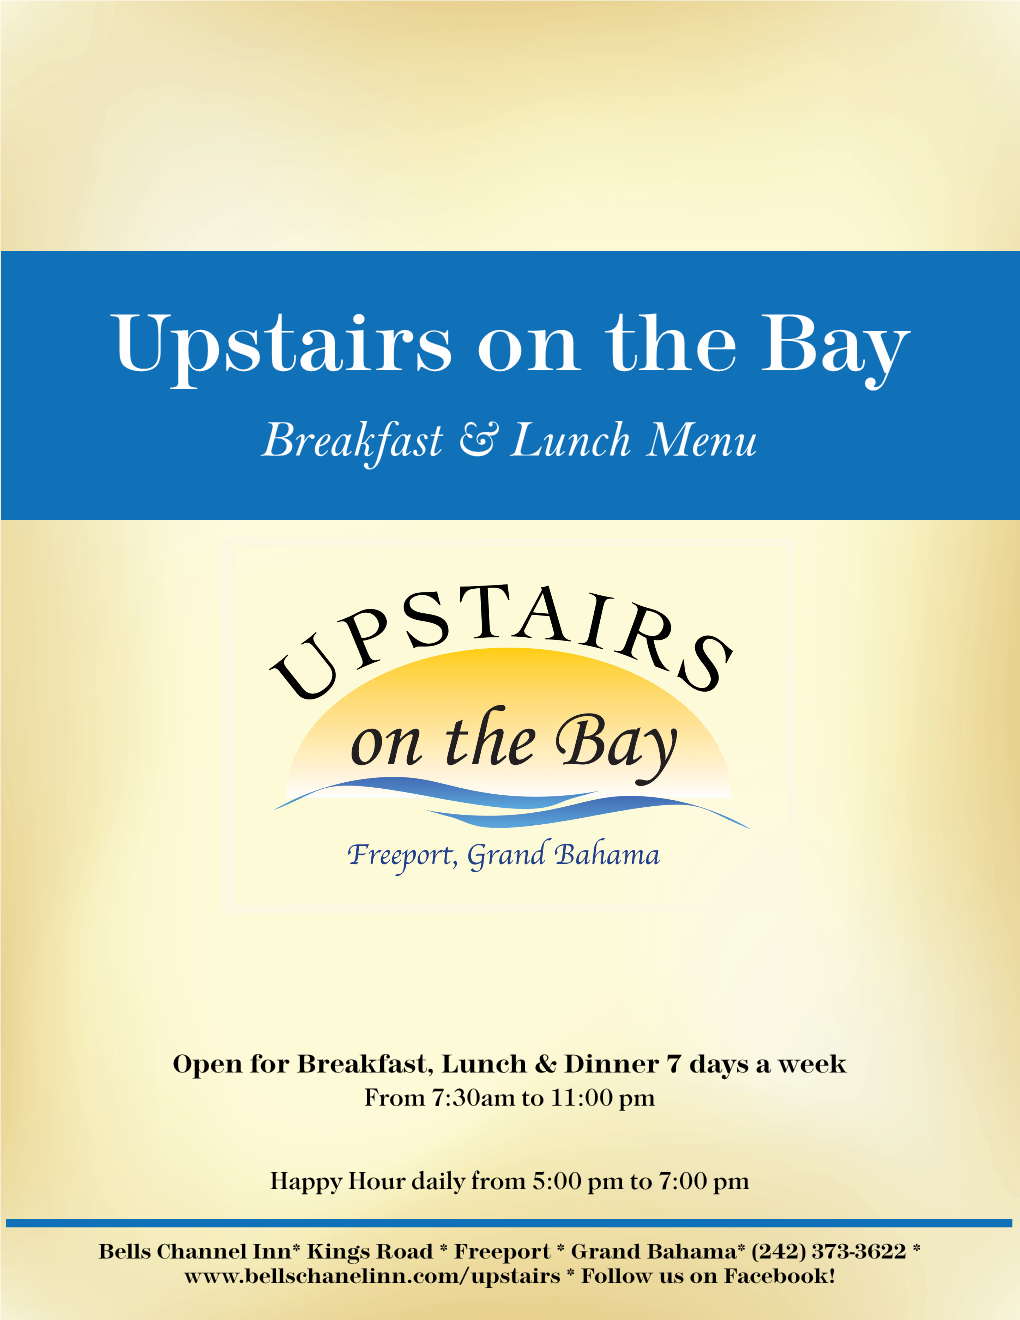 Upstairs on the Bay Breakfast & Lunch Menu